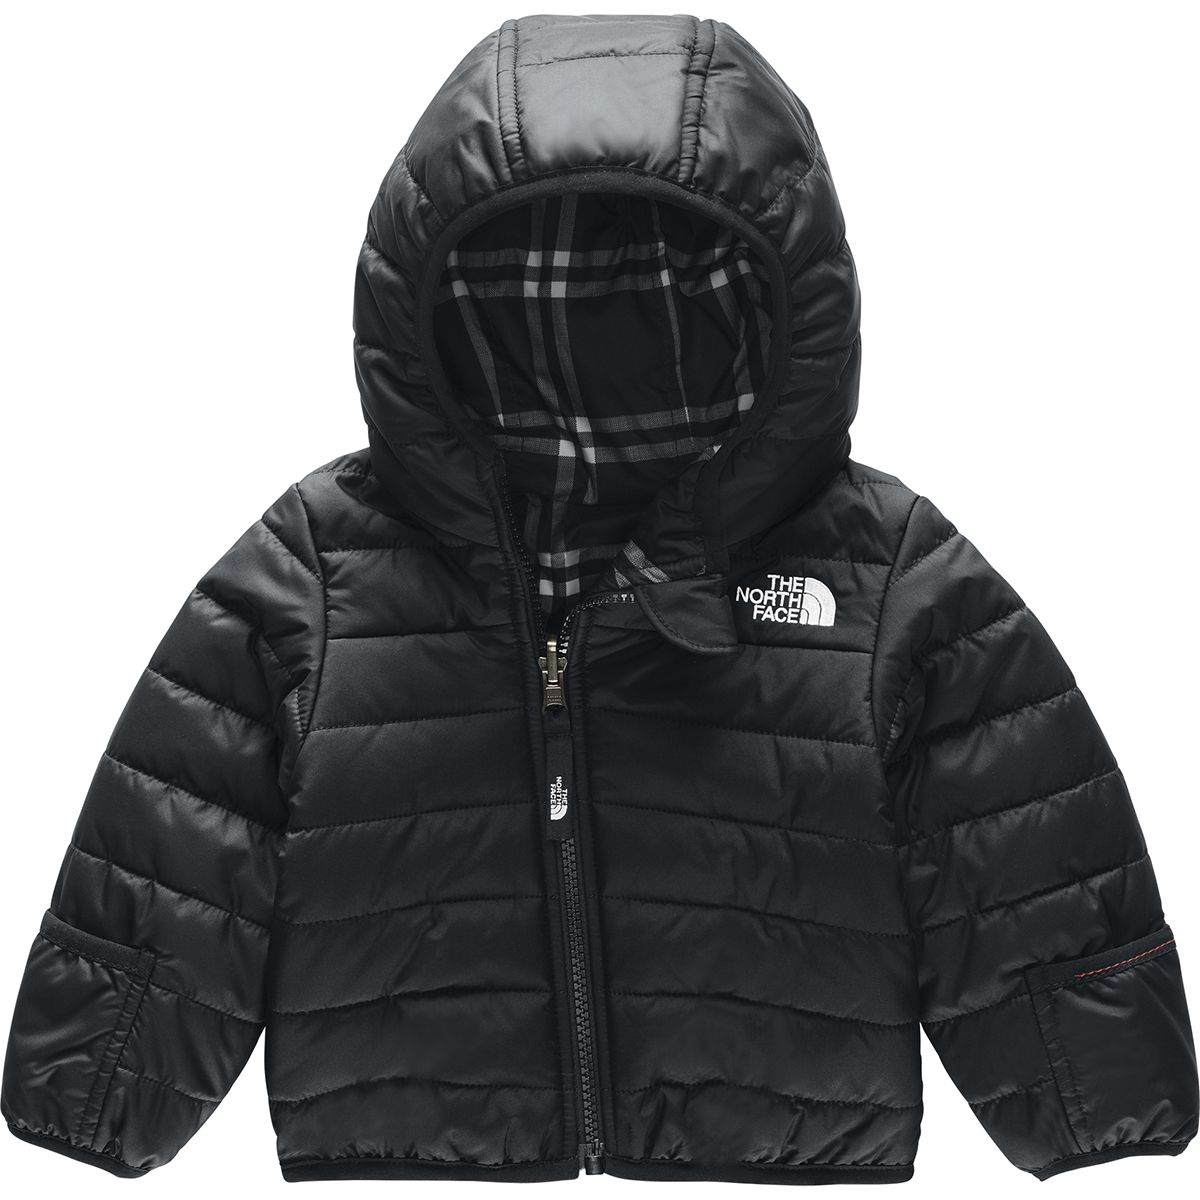 The North Face Perrito Reversible Hooded Jacket - Infant Boys ...